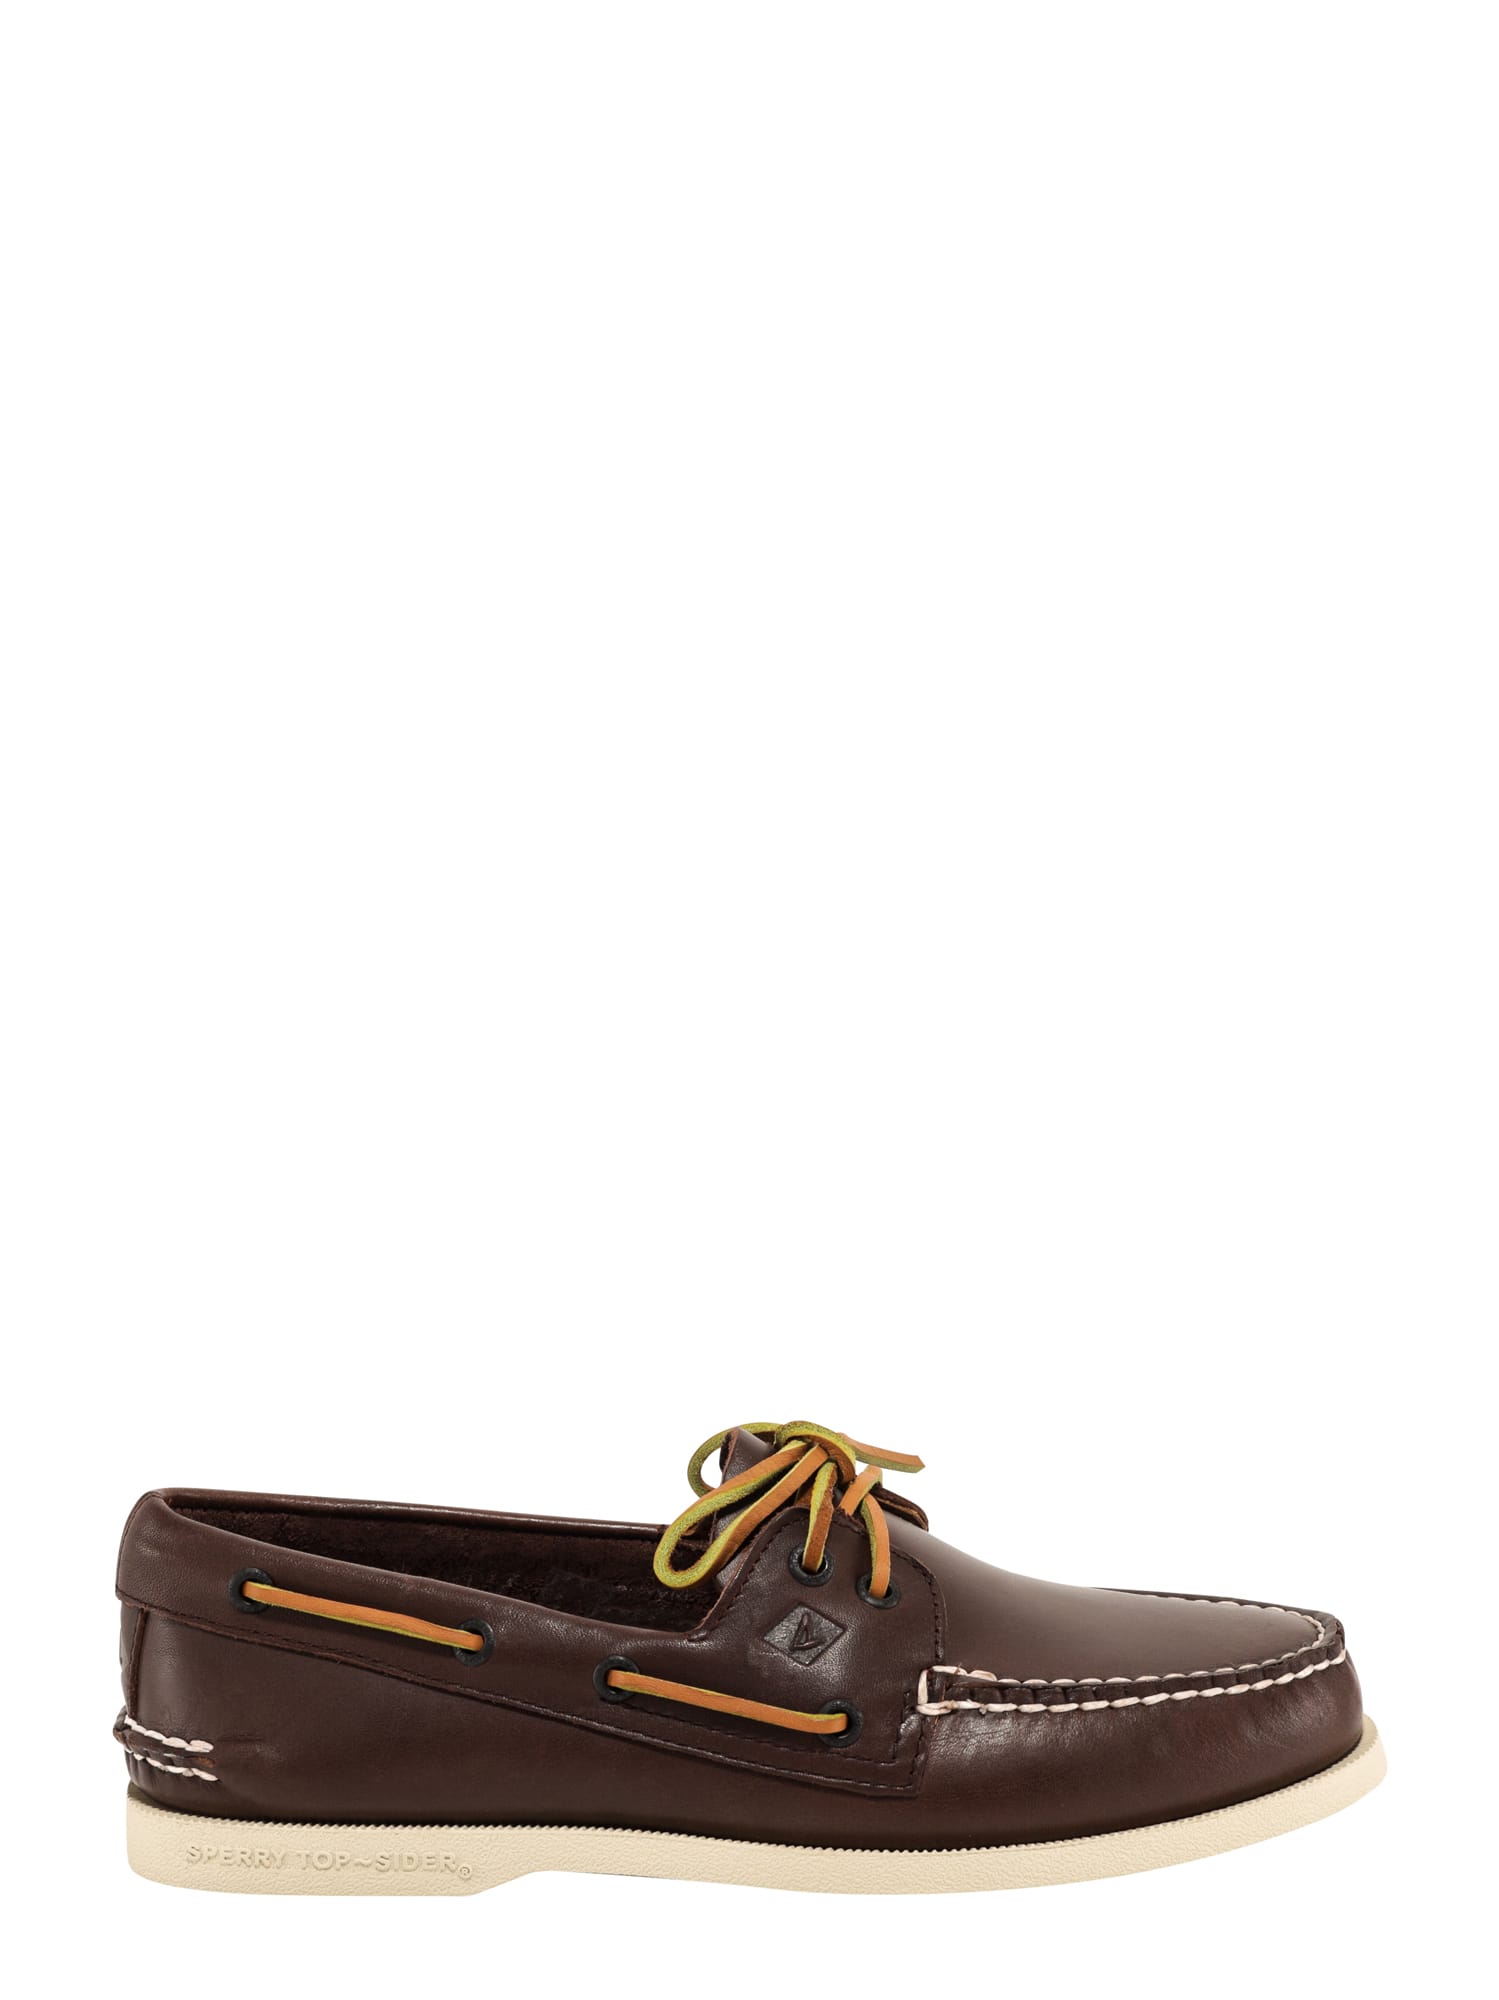 SPERRY BOAT SHOE,0195115 BROWN